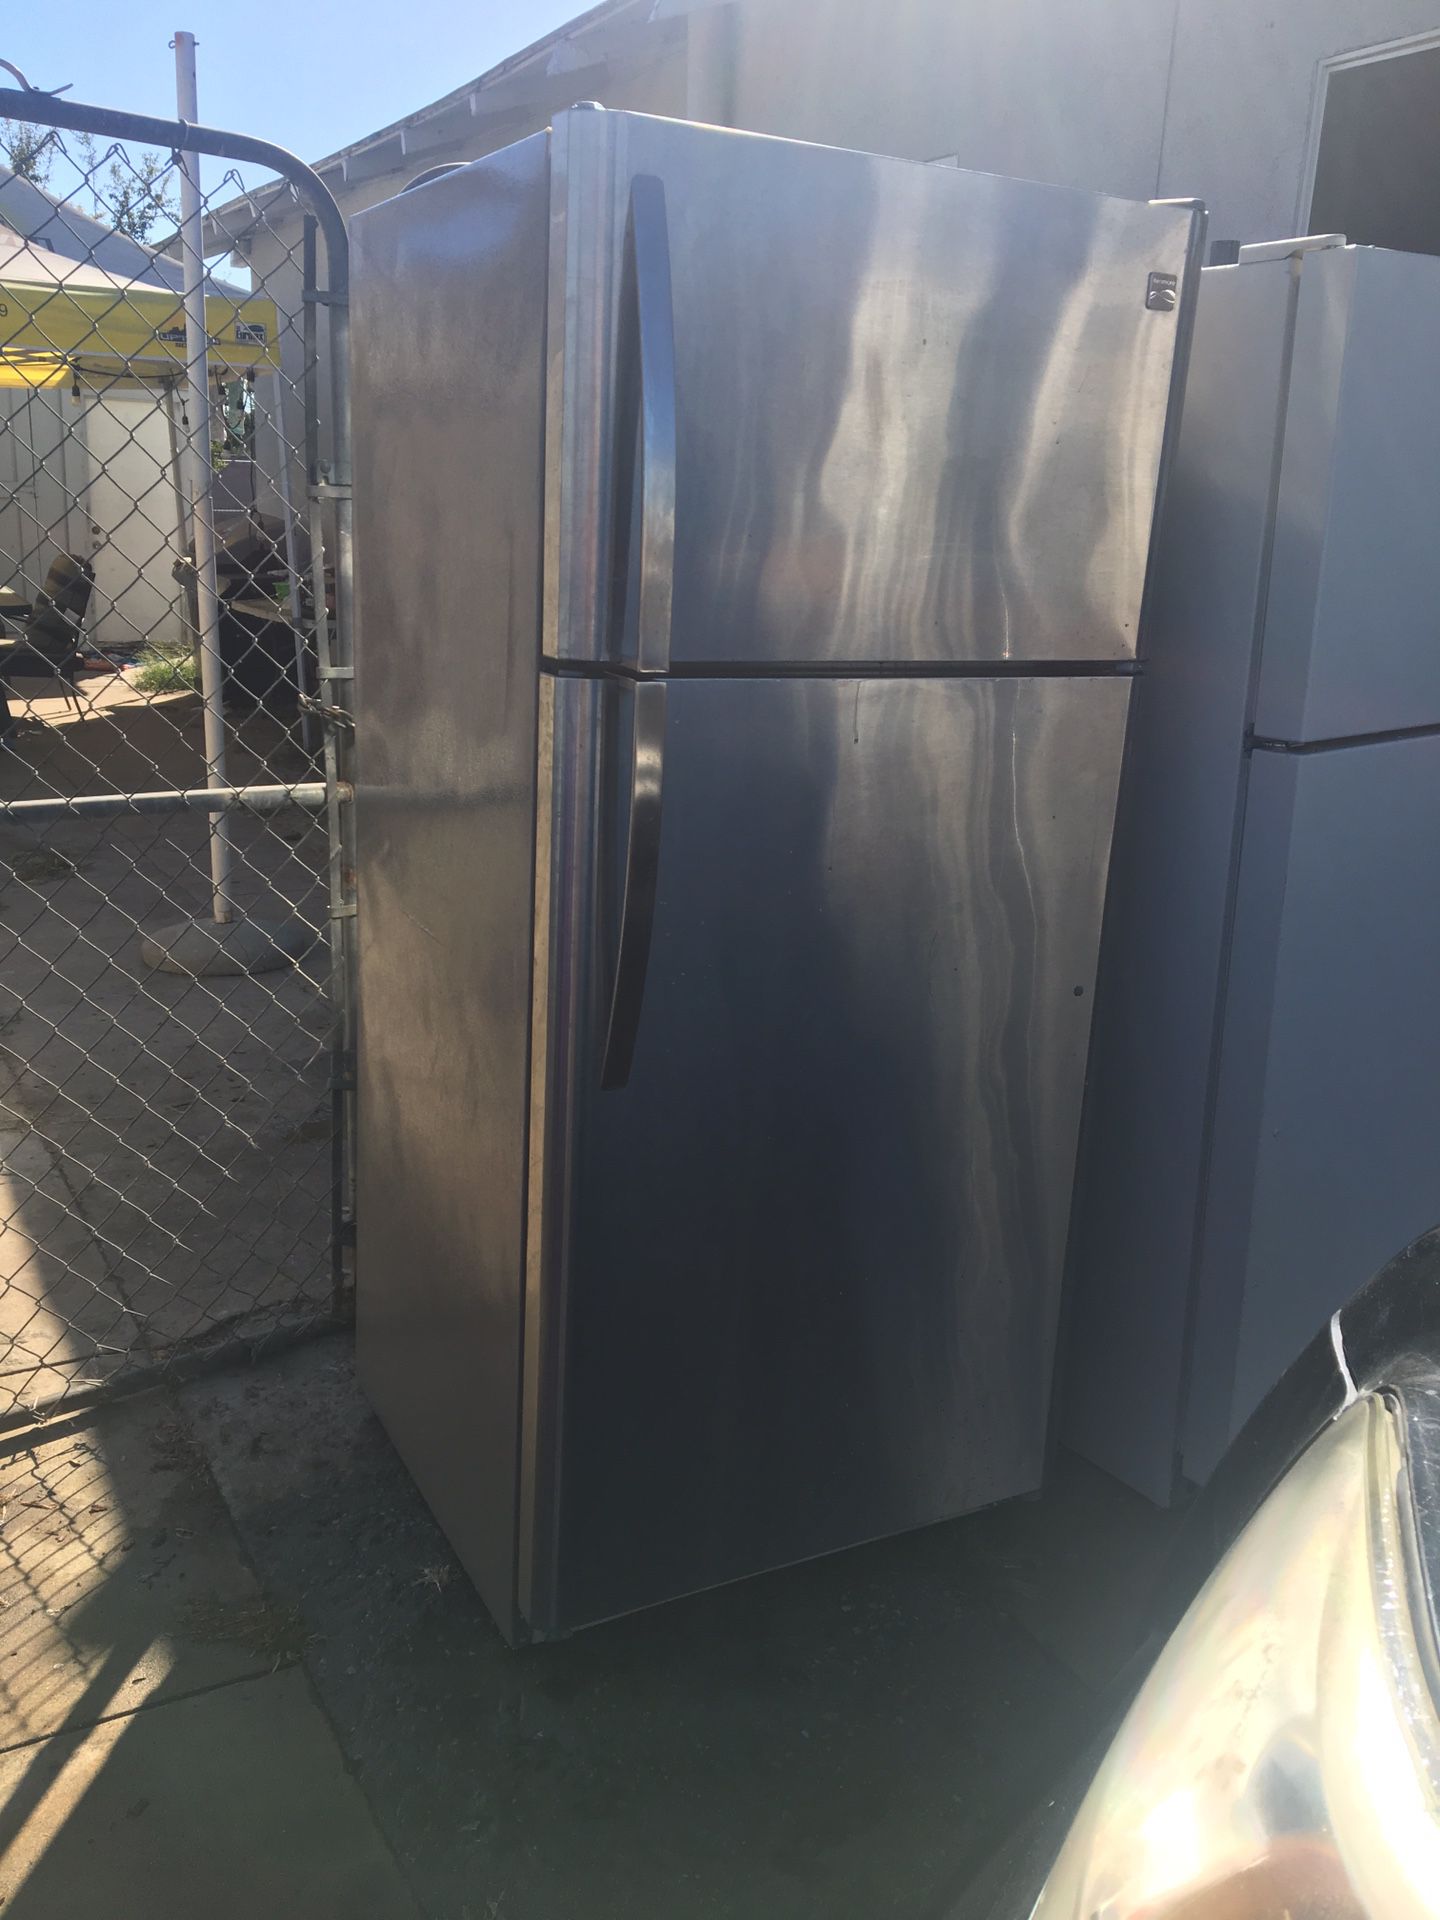 Stainless steel Kenmore fridge great conditions! With Ice Maker!Pick up in Long Beach